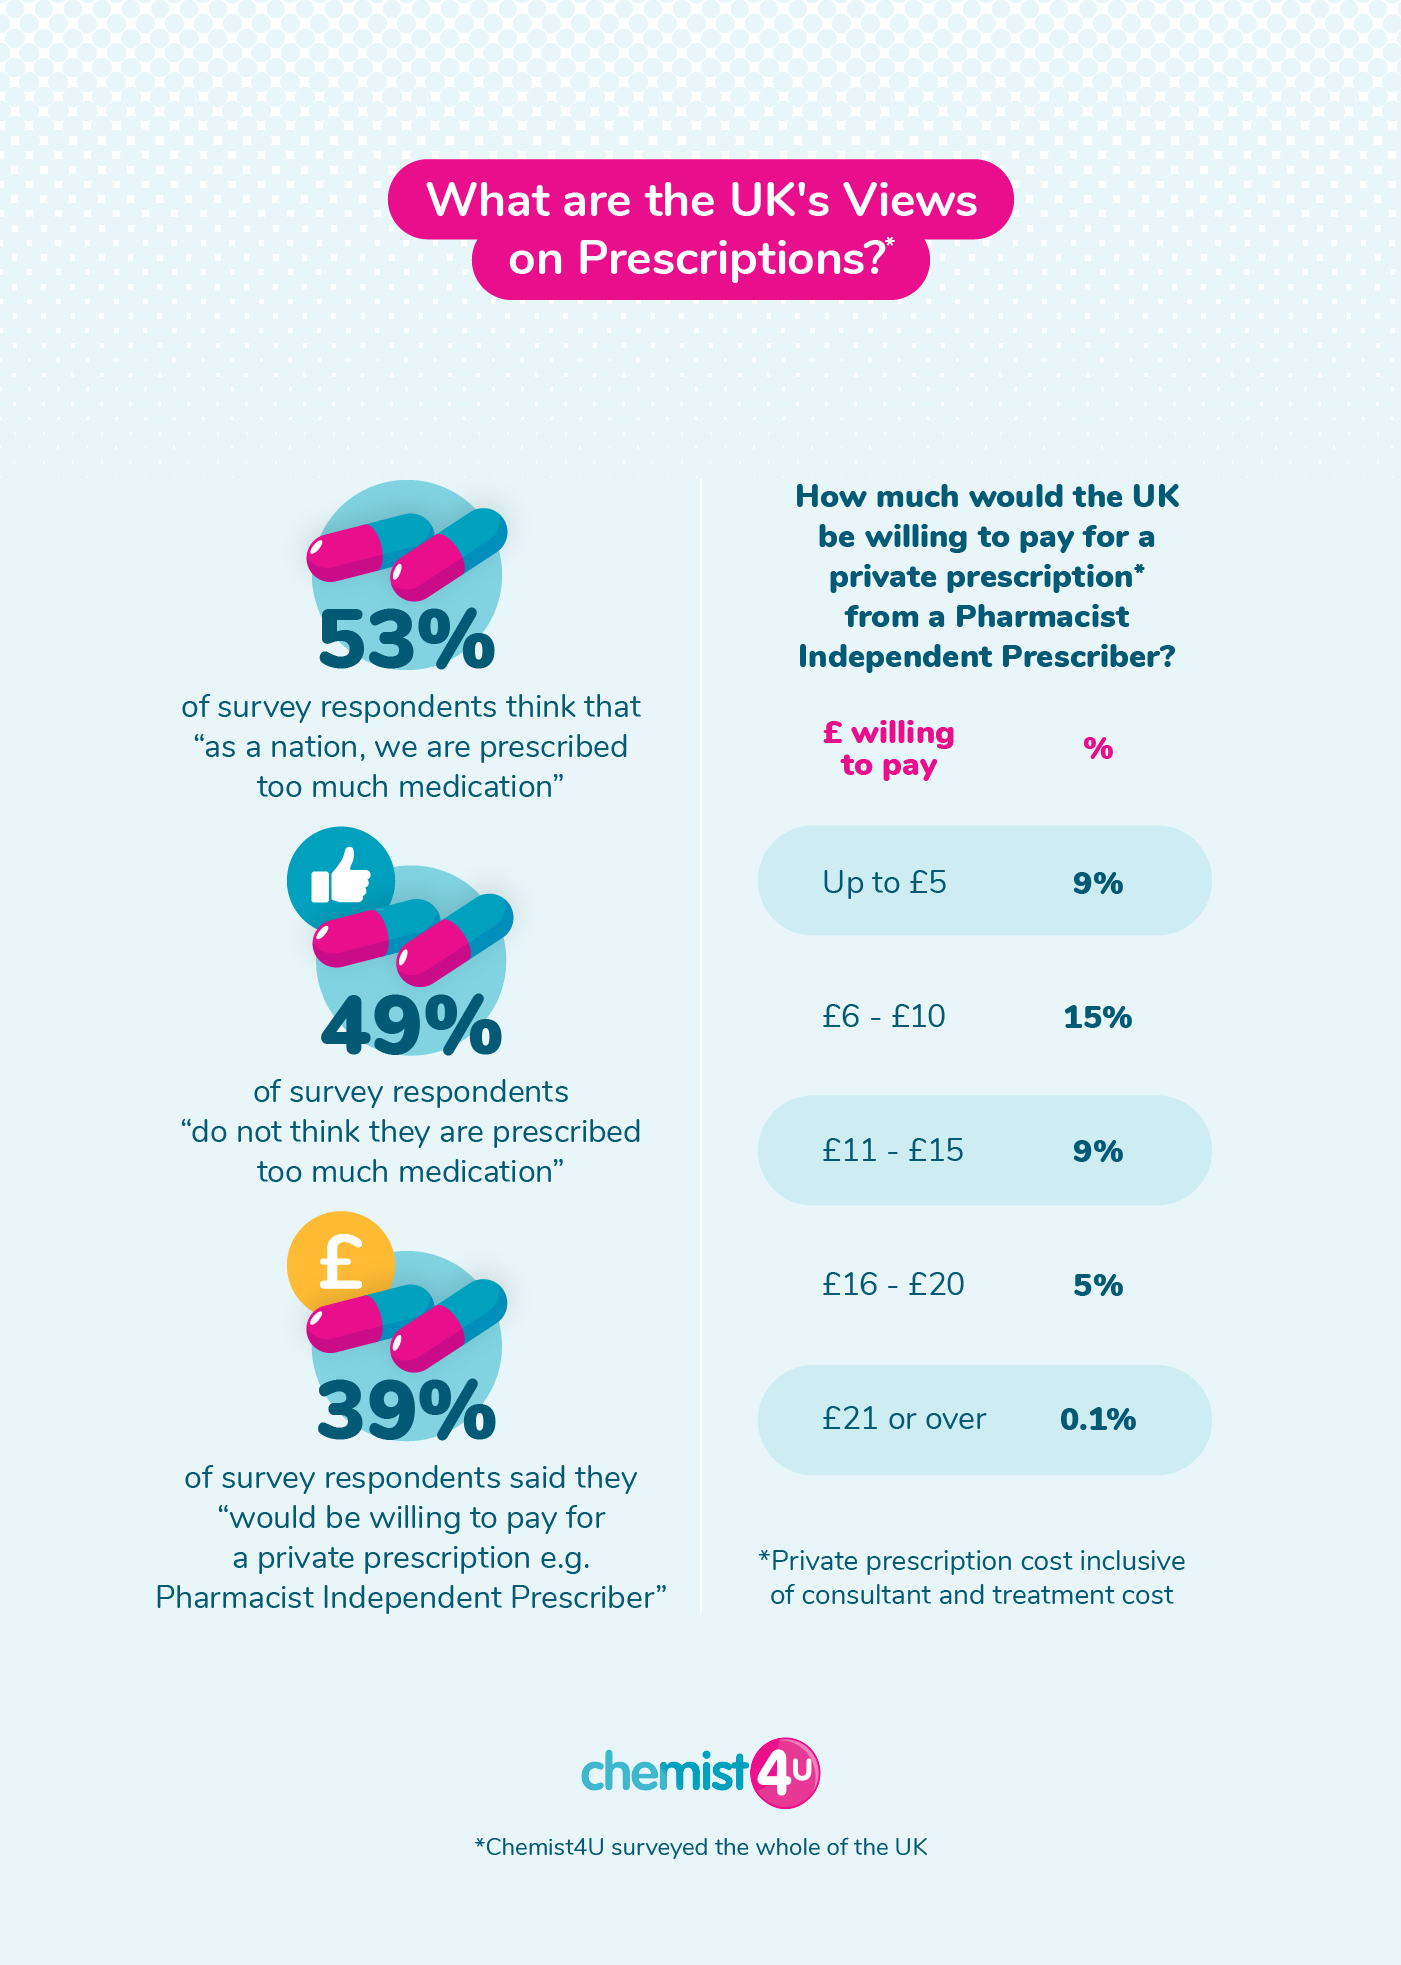 An infographic discussing the UK's views on prescriptions.